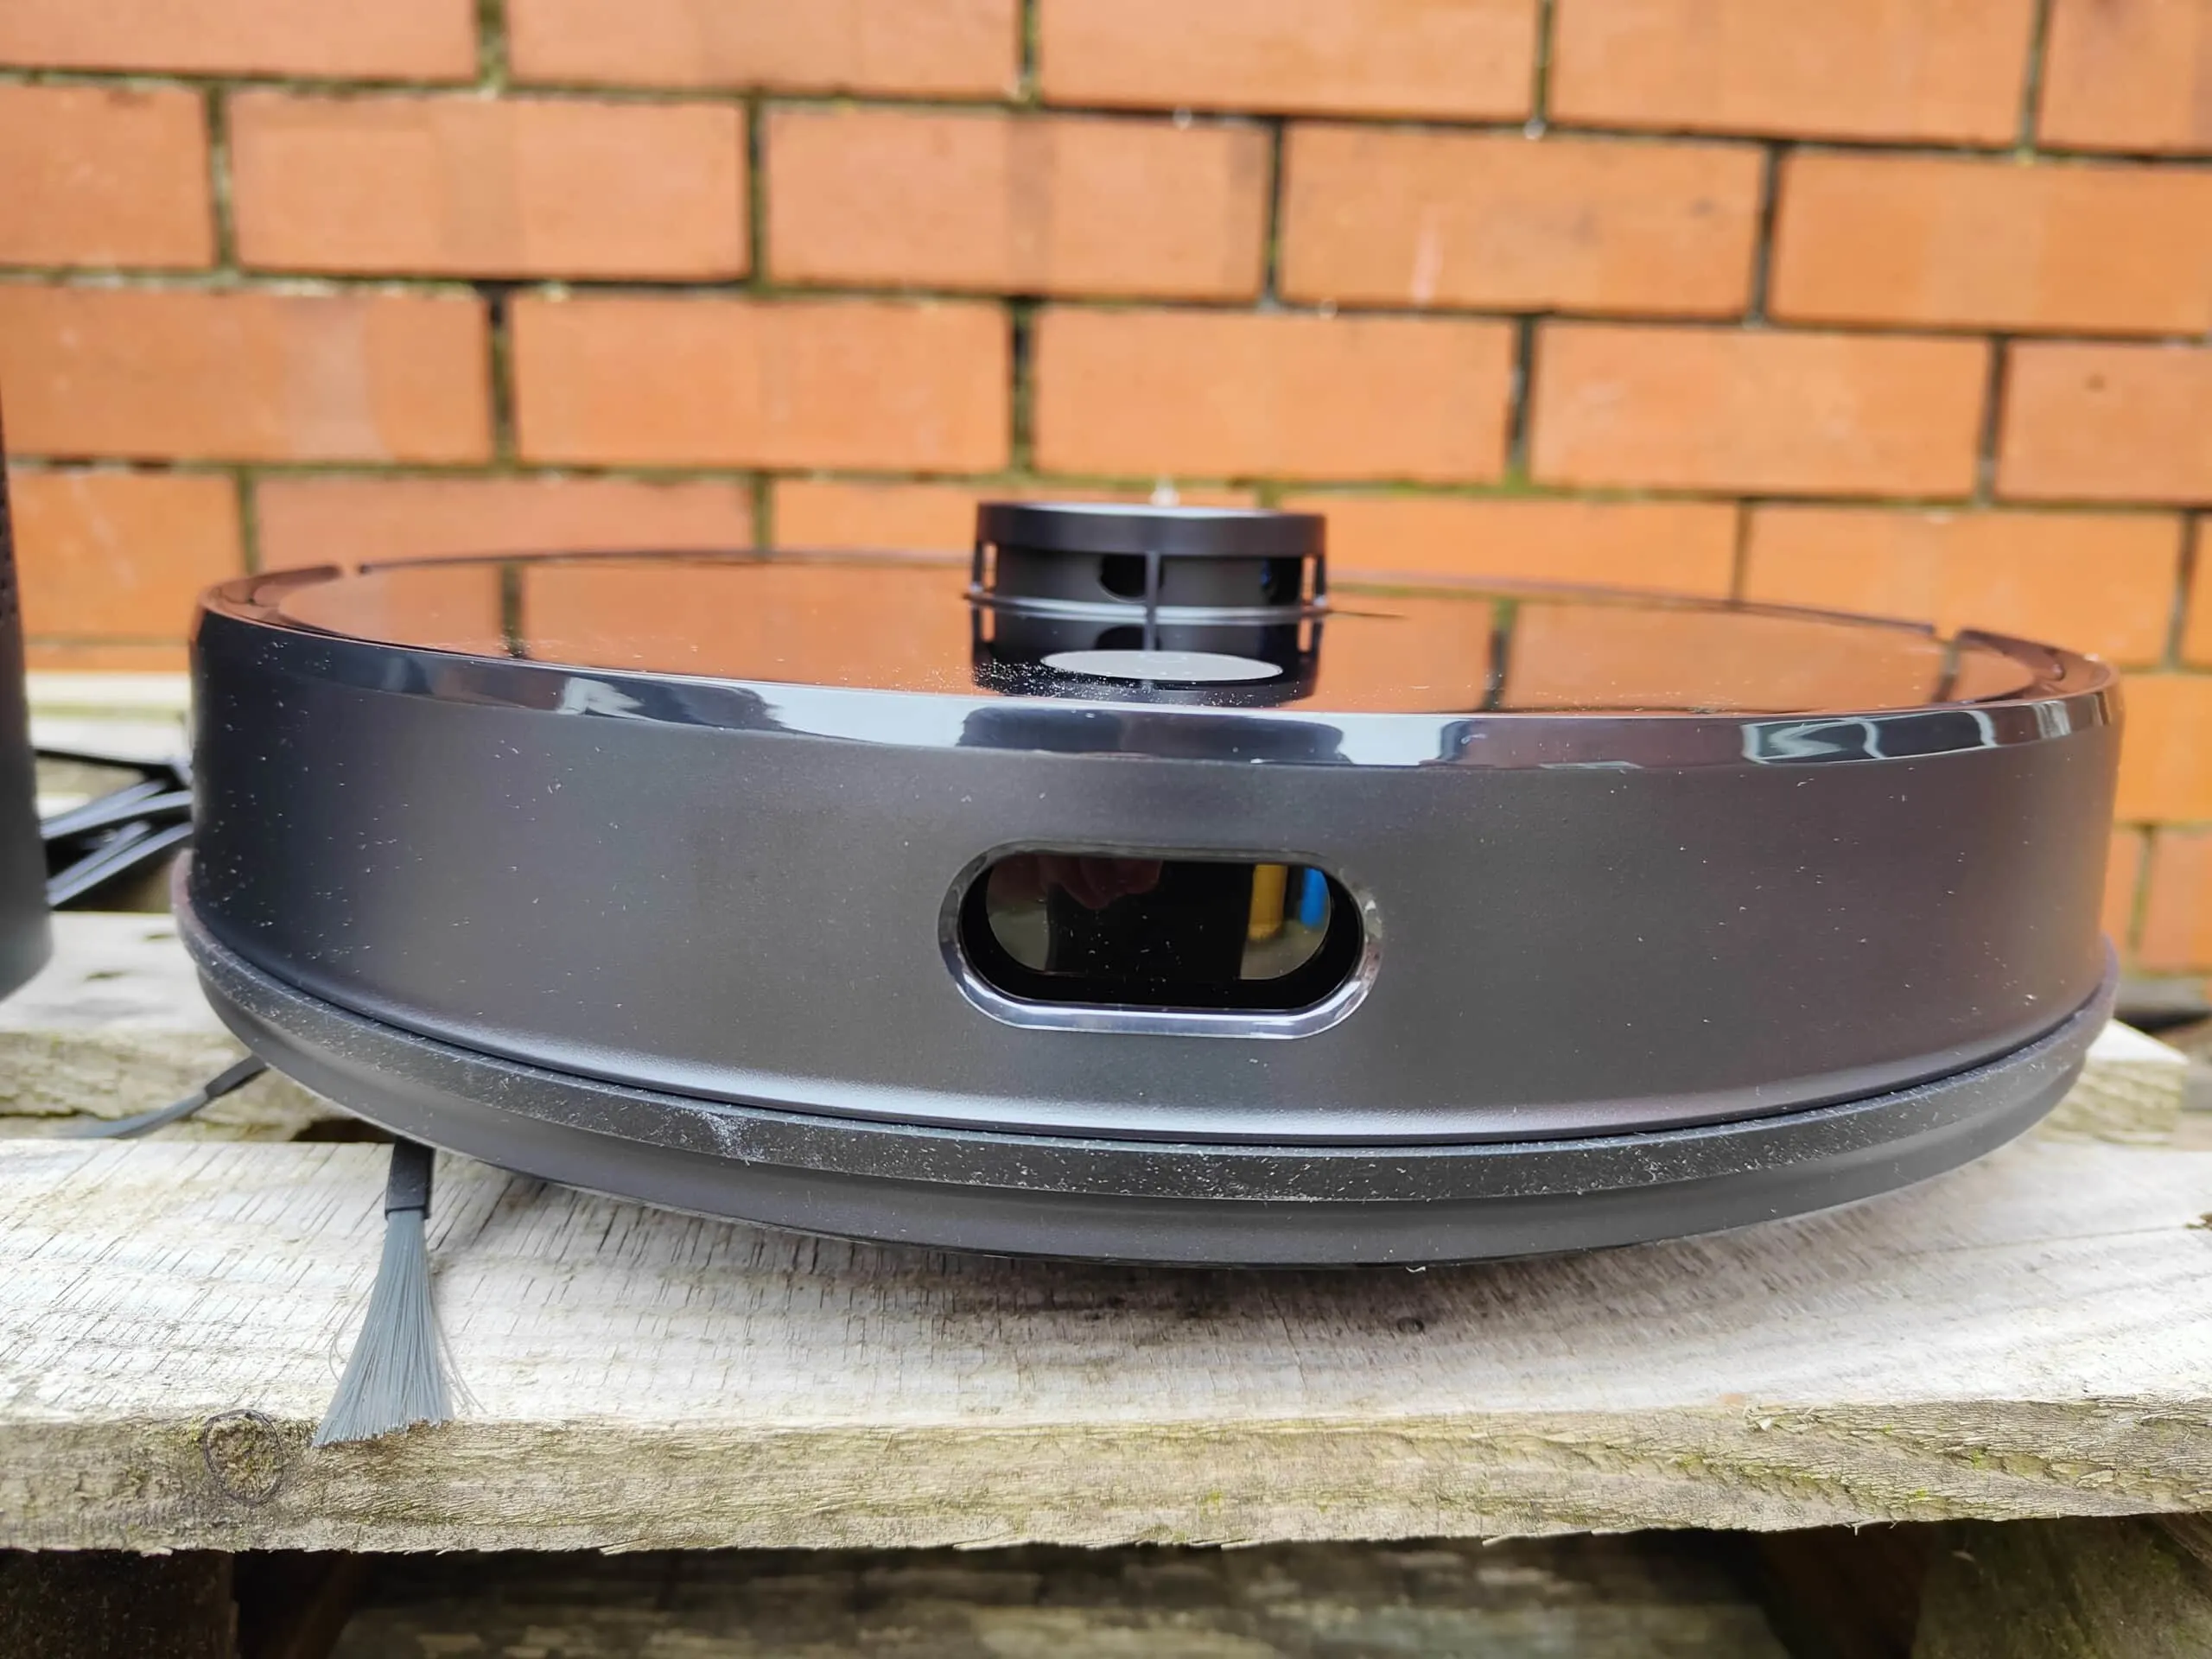 AIRROBO T10 plus self empty review2 scaled - AIRROBO T10+ Self-Empty Robot Vacuum & Mop Review - The cheapest self-emptying smart mapping vacuum on Amazon